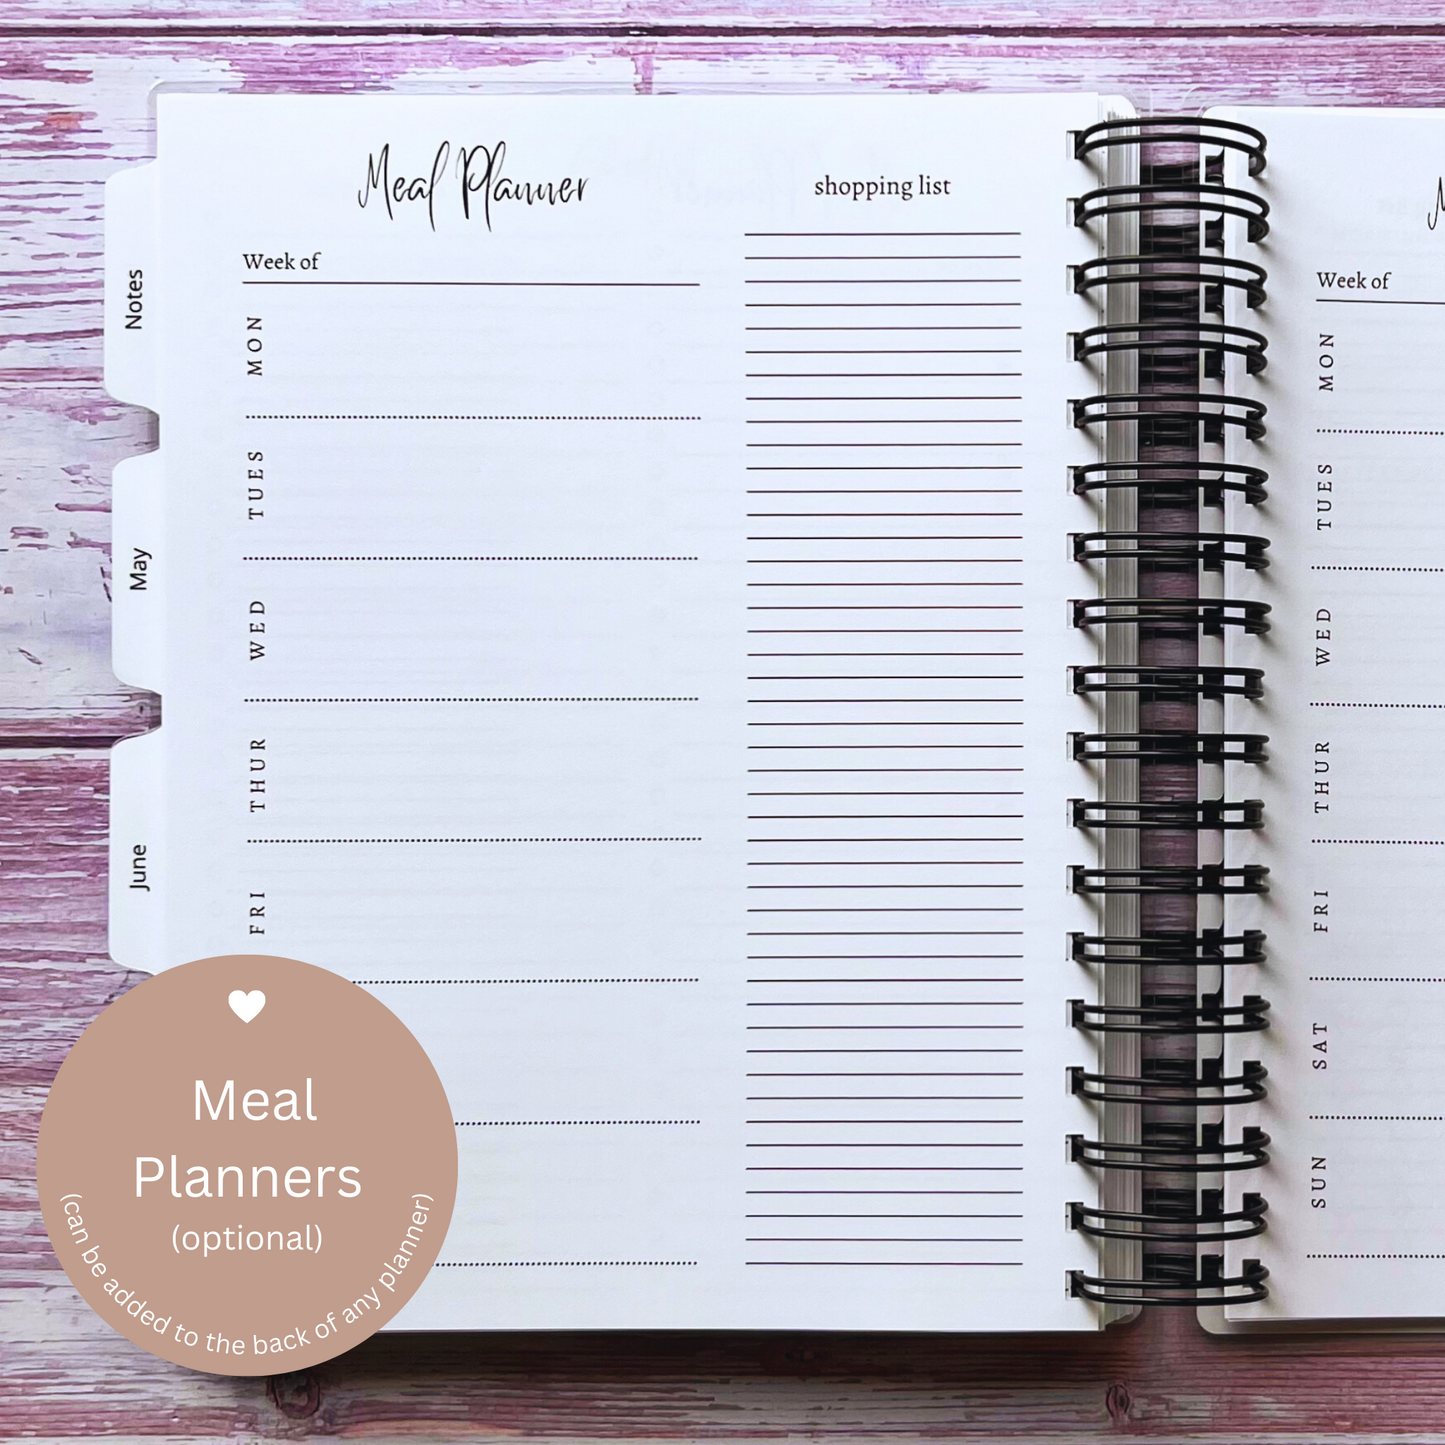 Bohemian Moon Personalized Planner